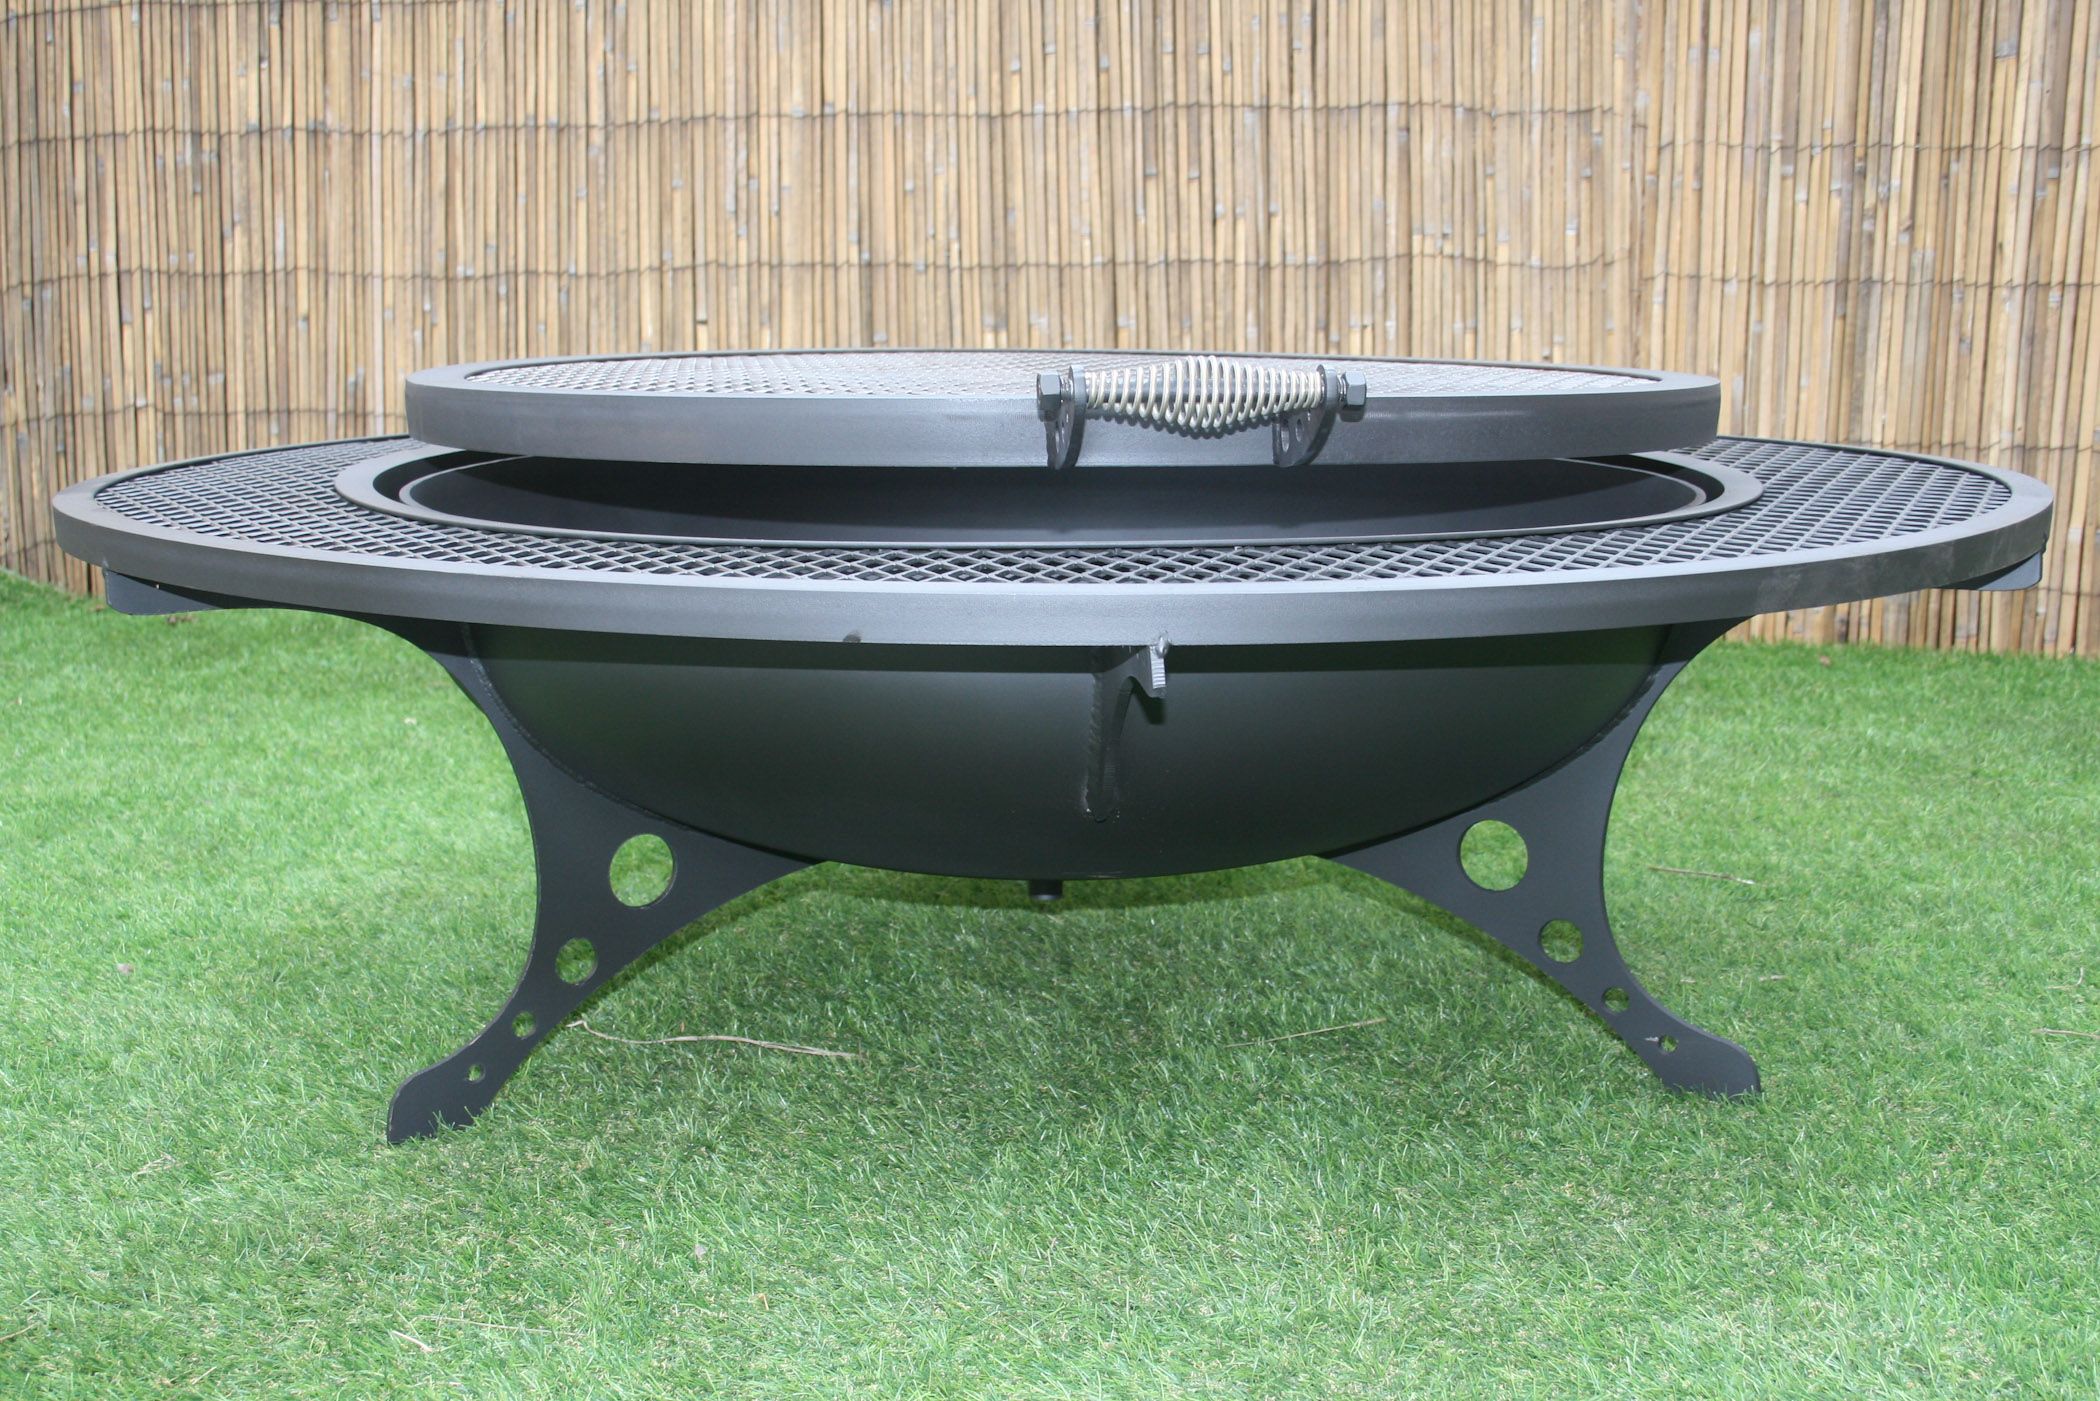 Buy Custom The Rounder Steel Fire Pit With Grill Top And Wraparound Shelf. Steel Yard Art